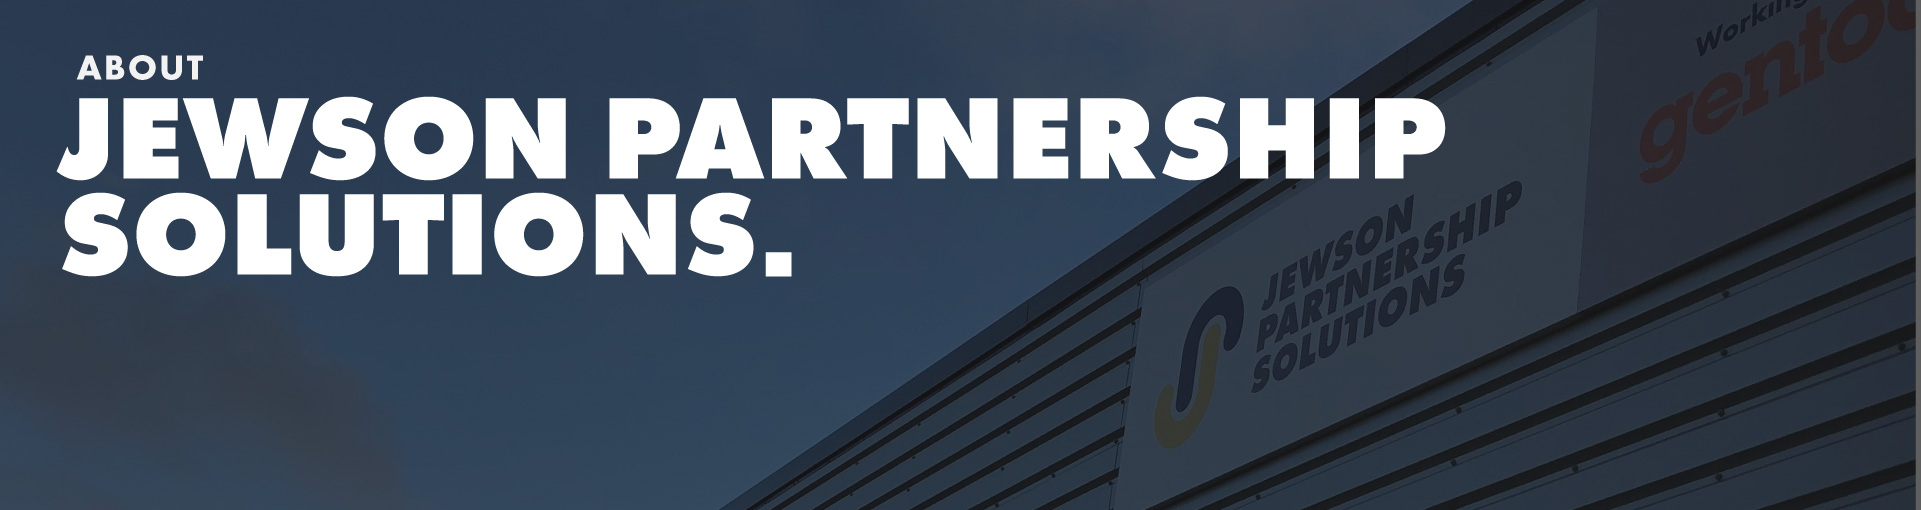 About Jewson Partnership Solutions